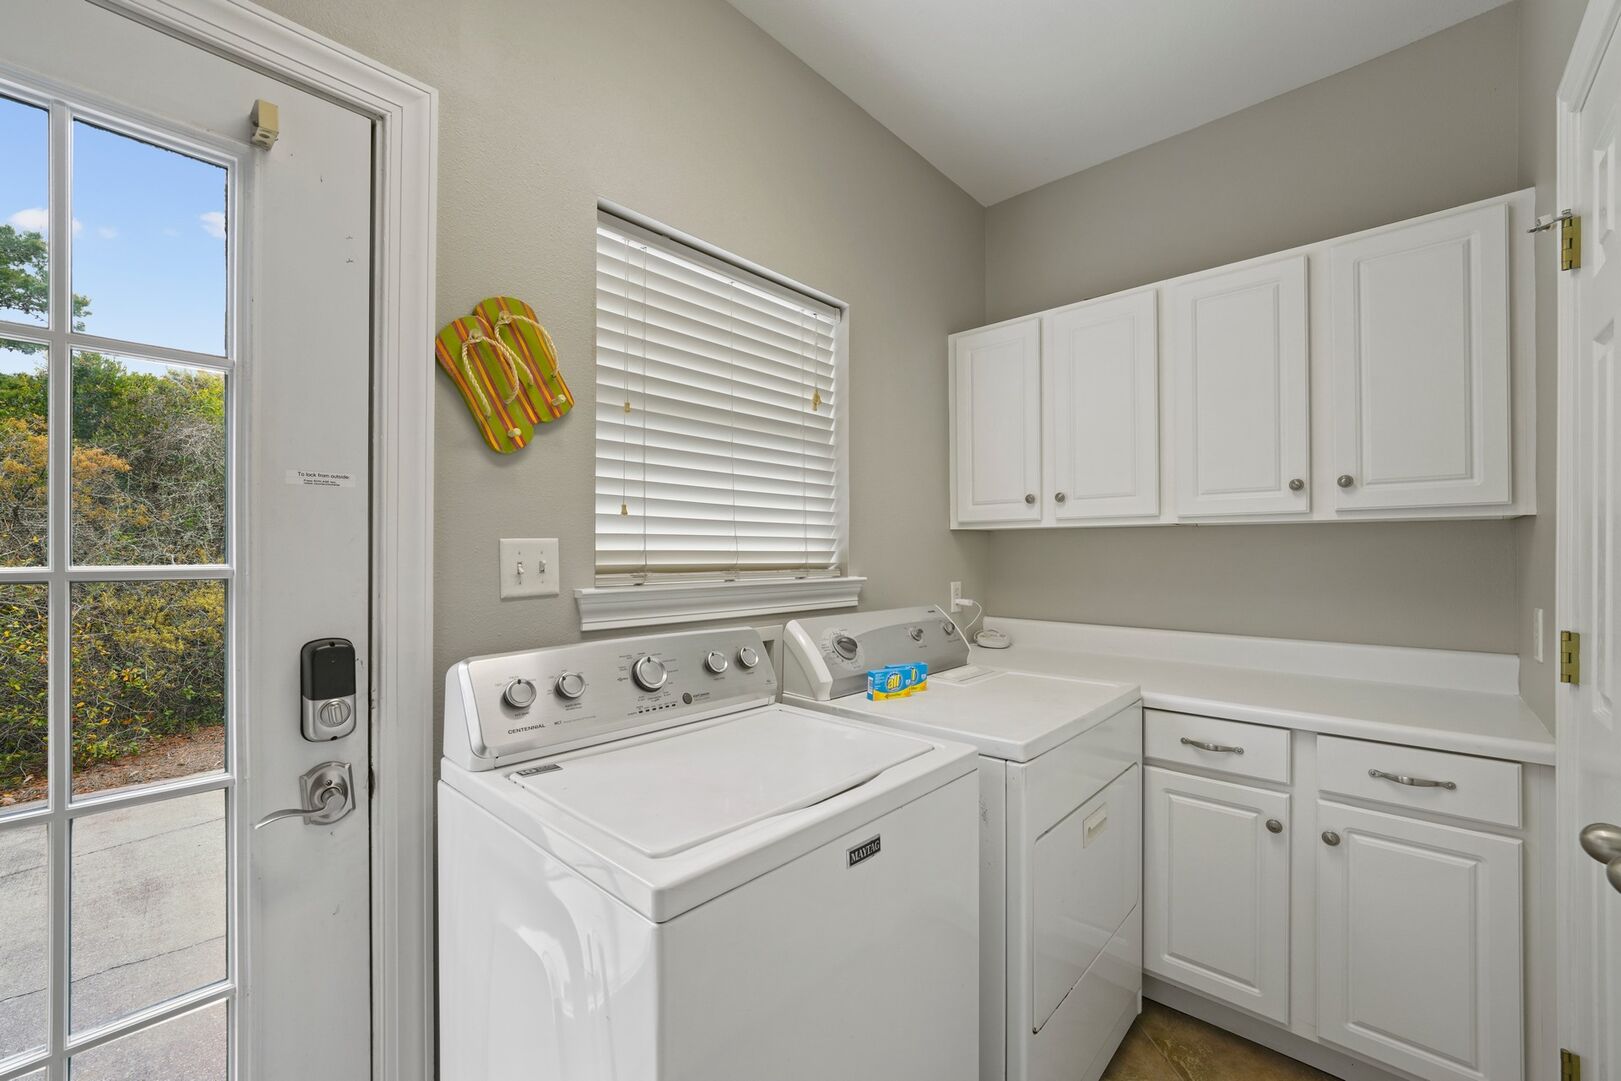 Laundry room (4 bedroom home)